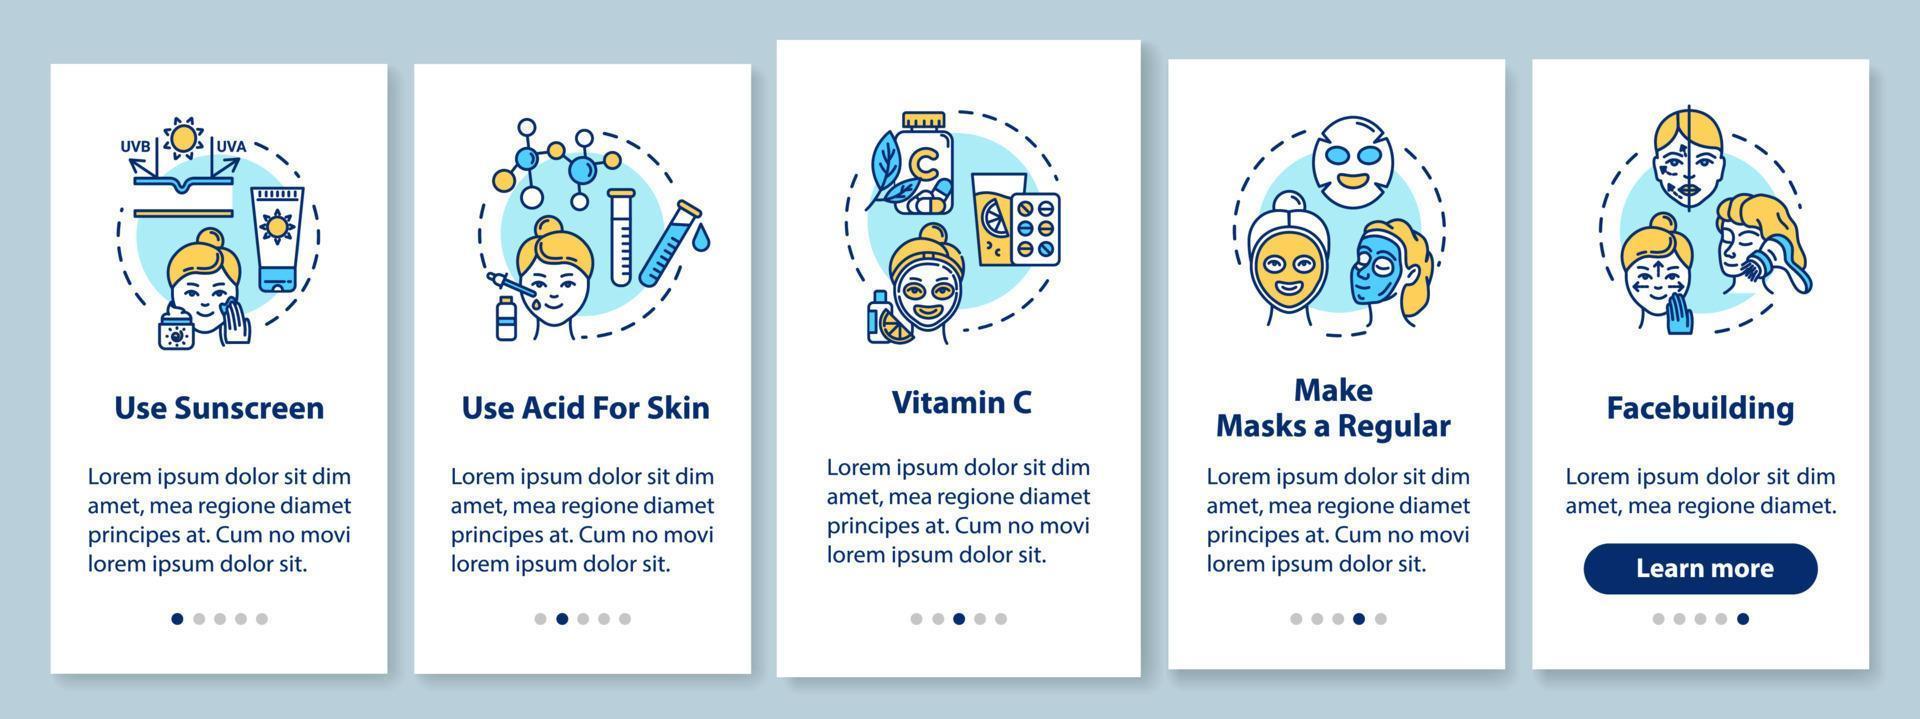 Skicare onboarding mobile app page screen with concepts. Facebuilding, regular facial masks. Cosmetology walkthrough 5 steps graphic instructions. UI vector template with RGB color illustrations